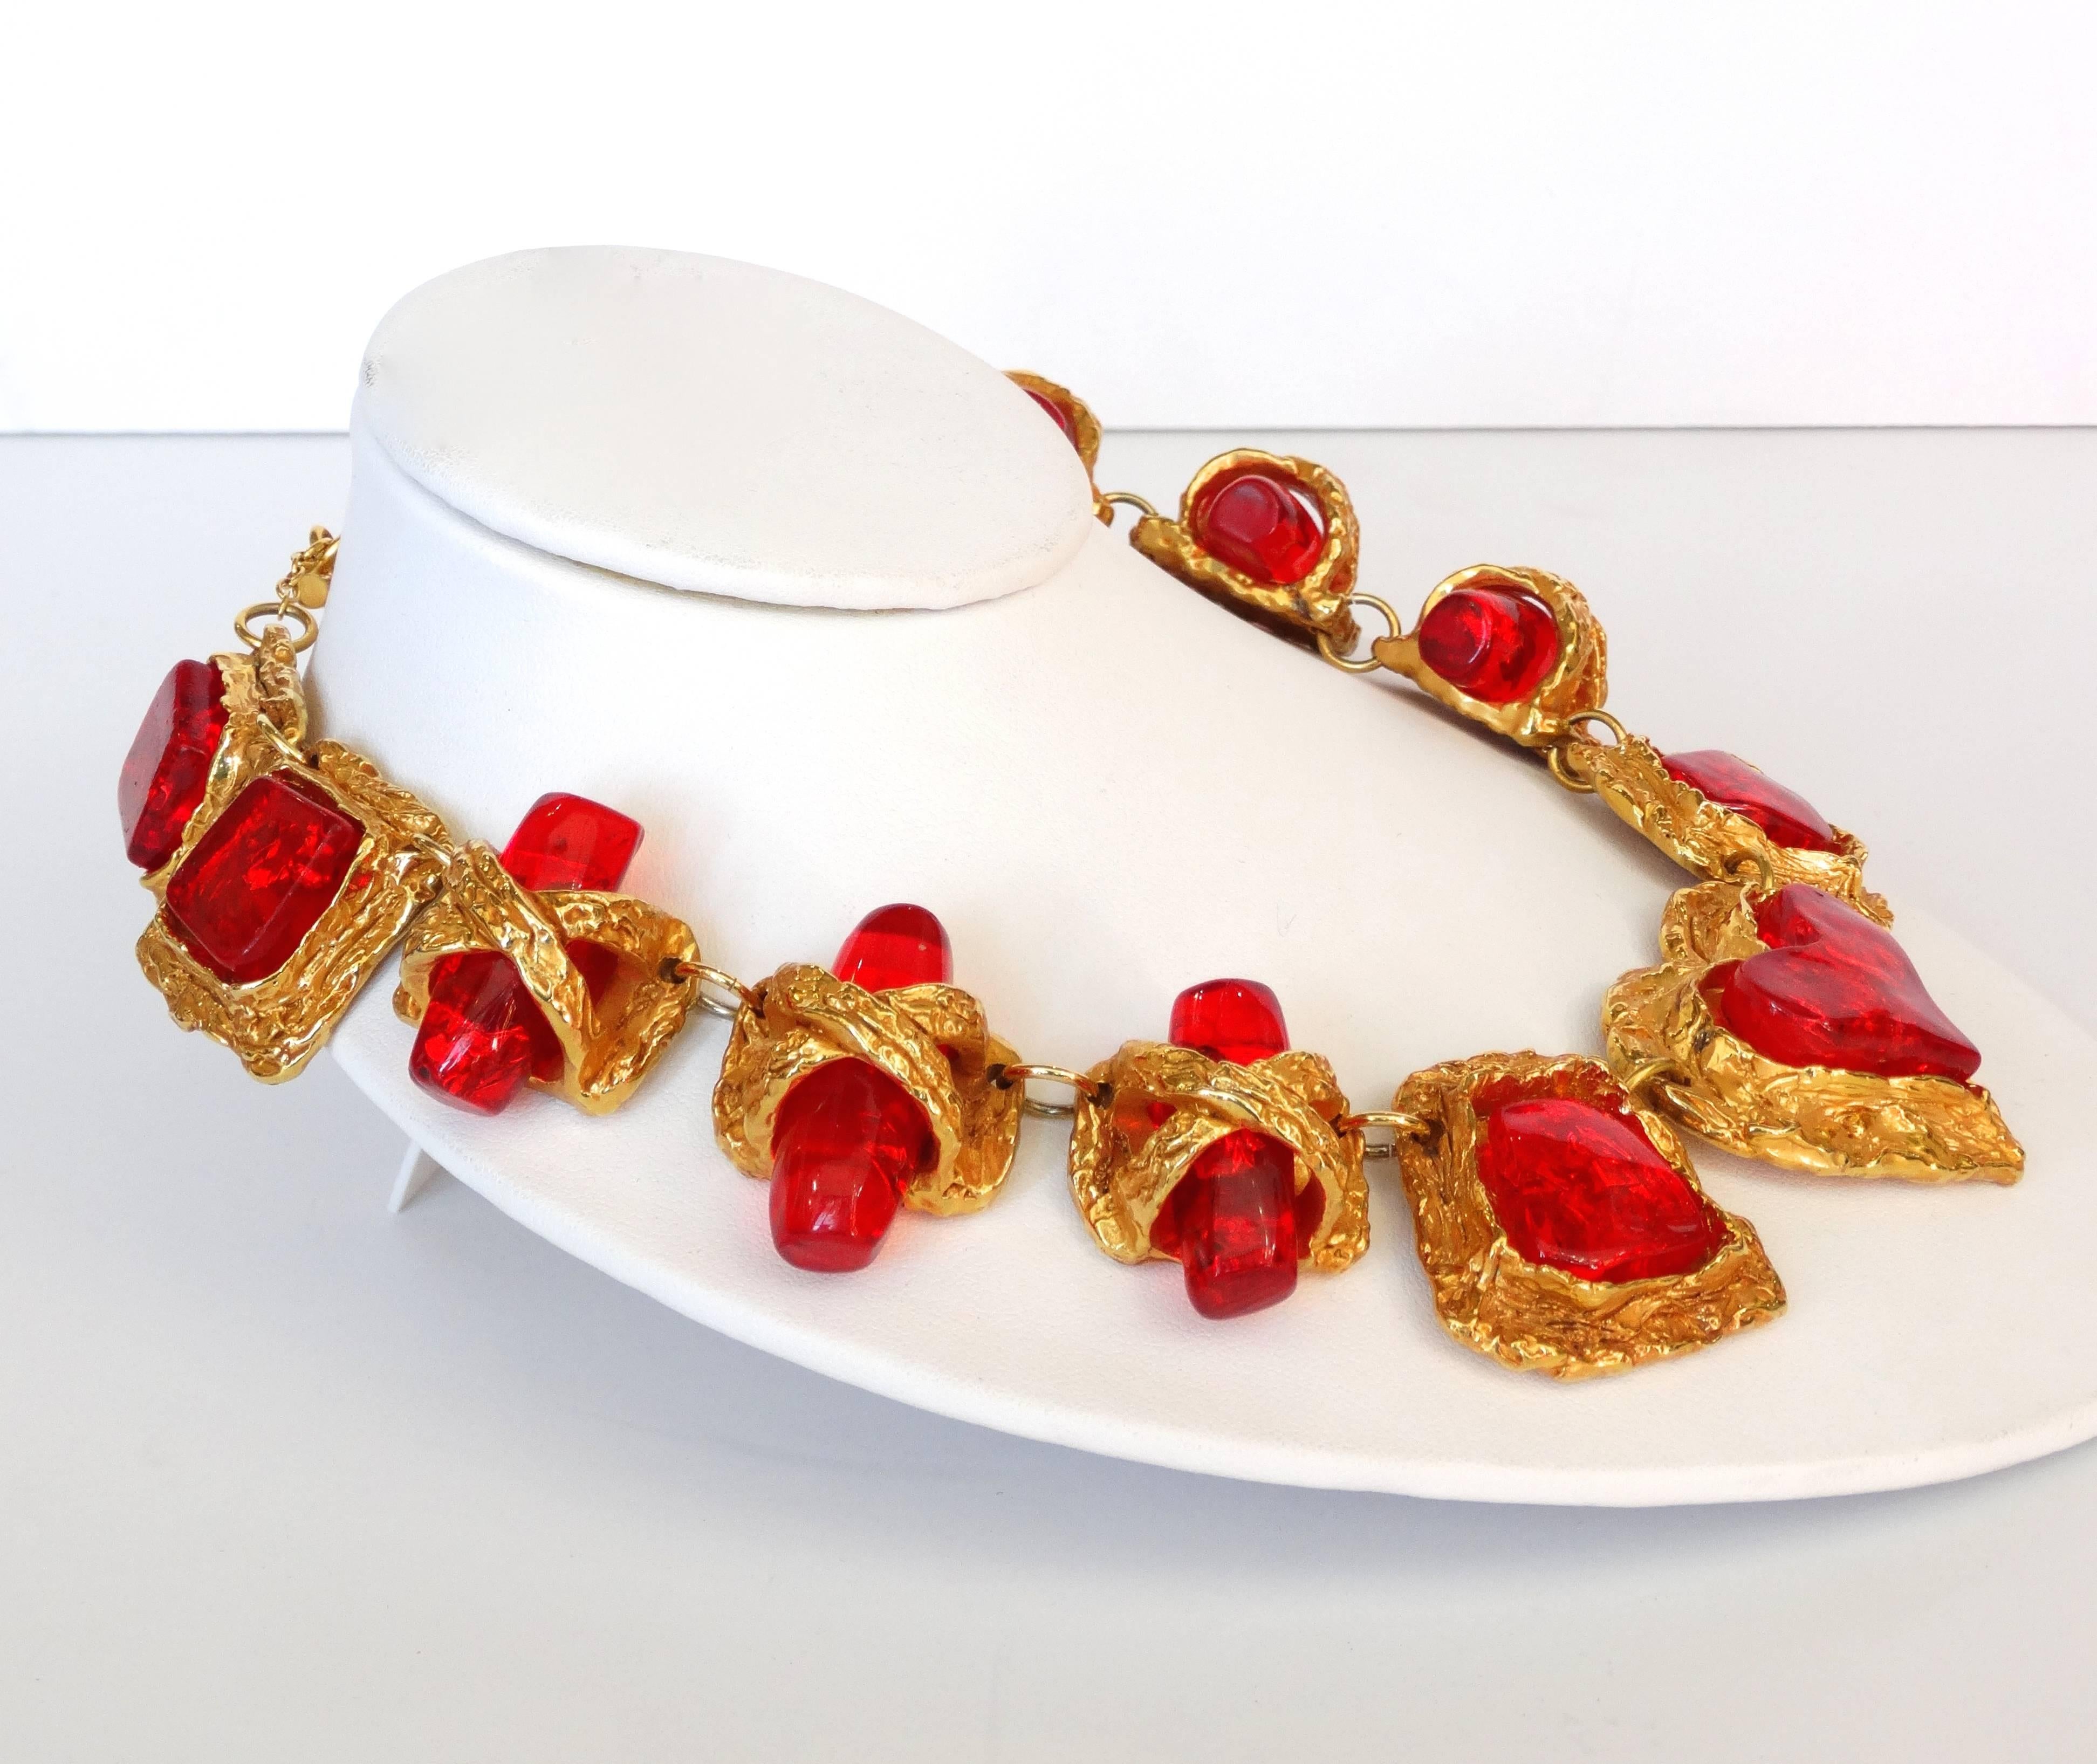 We LIVE for Christian La Croix's vintage jewelry- this piece is no exception! Incredible 1980s statement necklace with heart shaped pendant at the center. Brushed, crumpled textured gold metal with translucent red enamel jewels. Foil suspended in